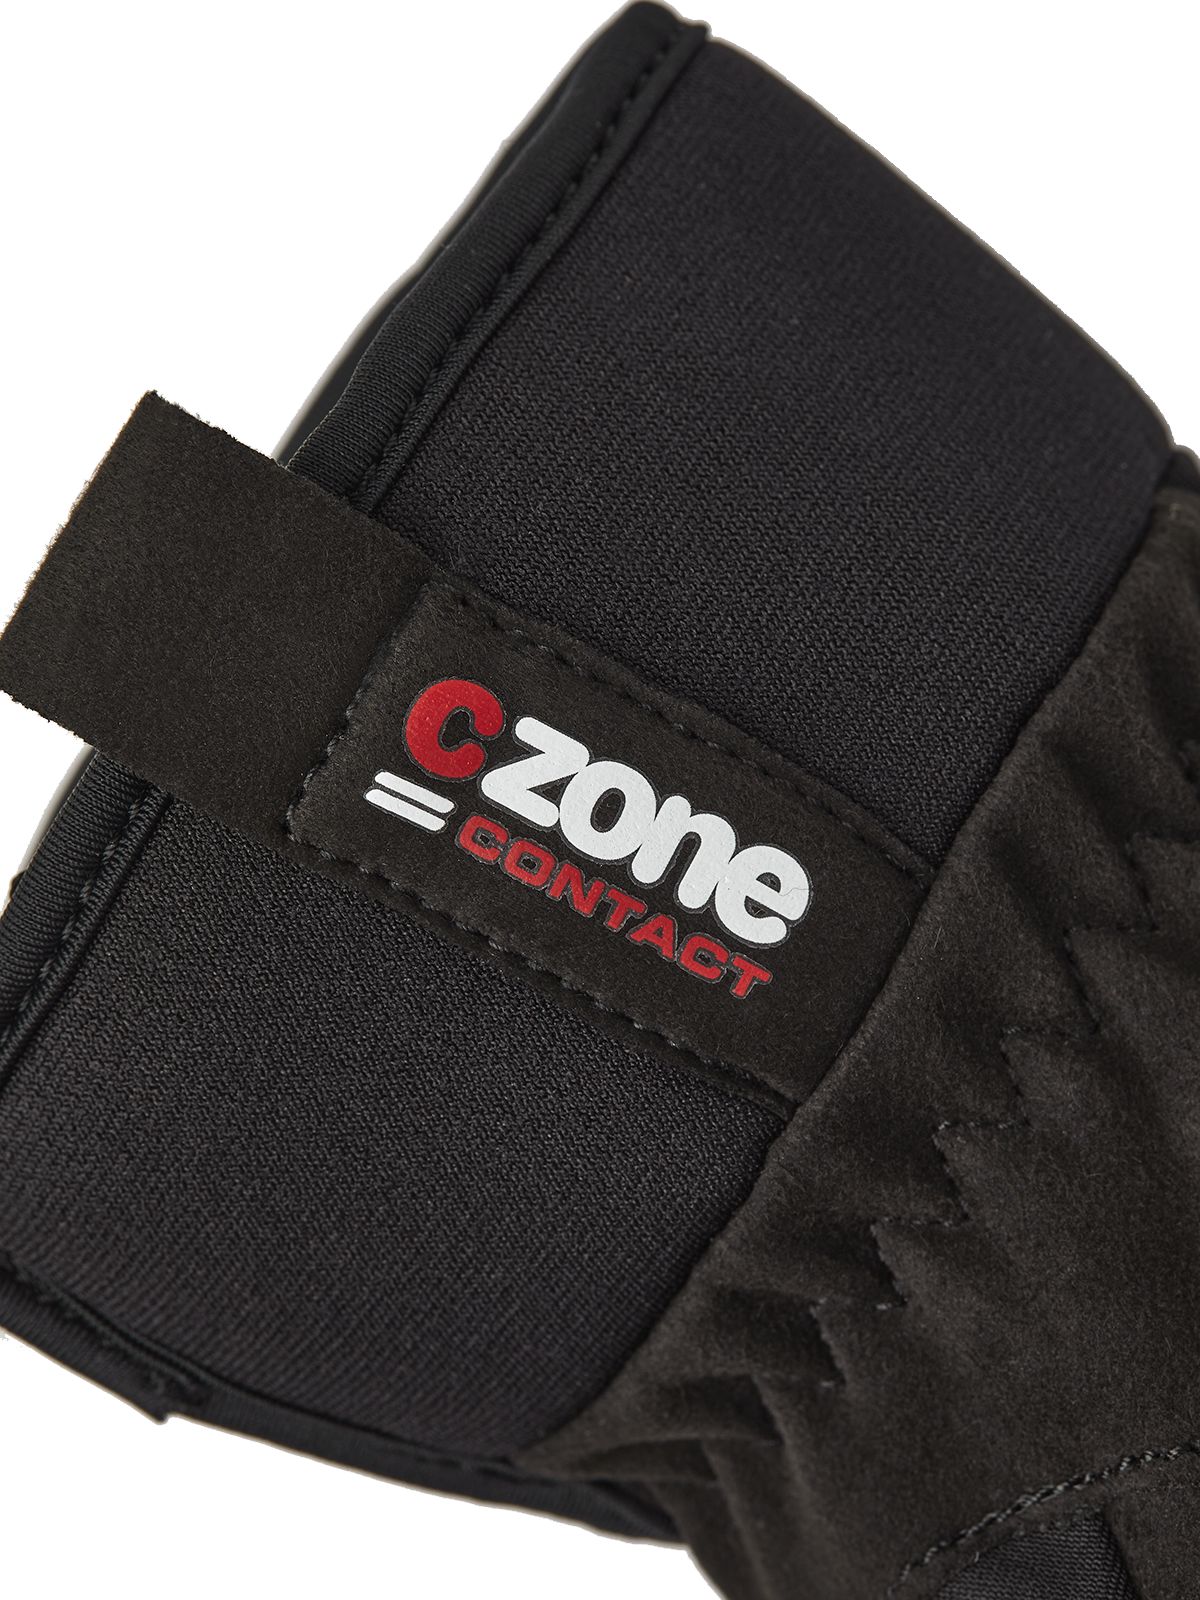 HESTRA, CZone Contact Glove -5 finger